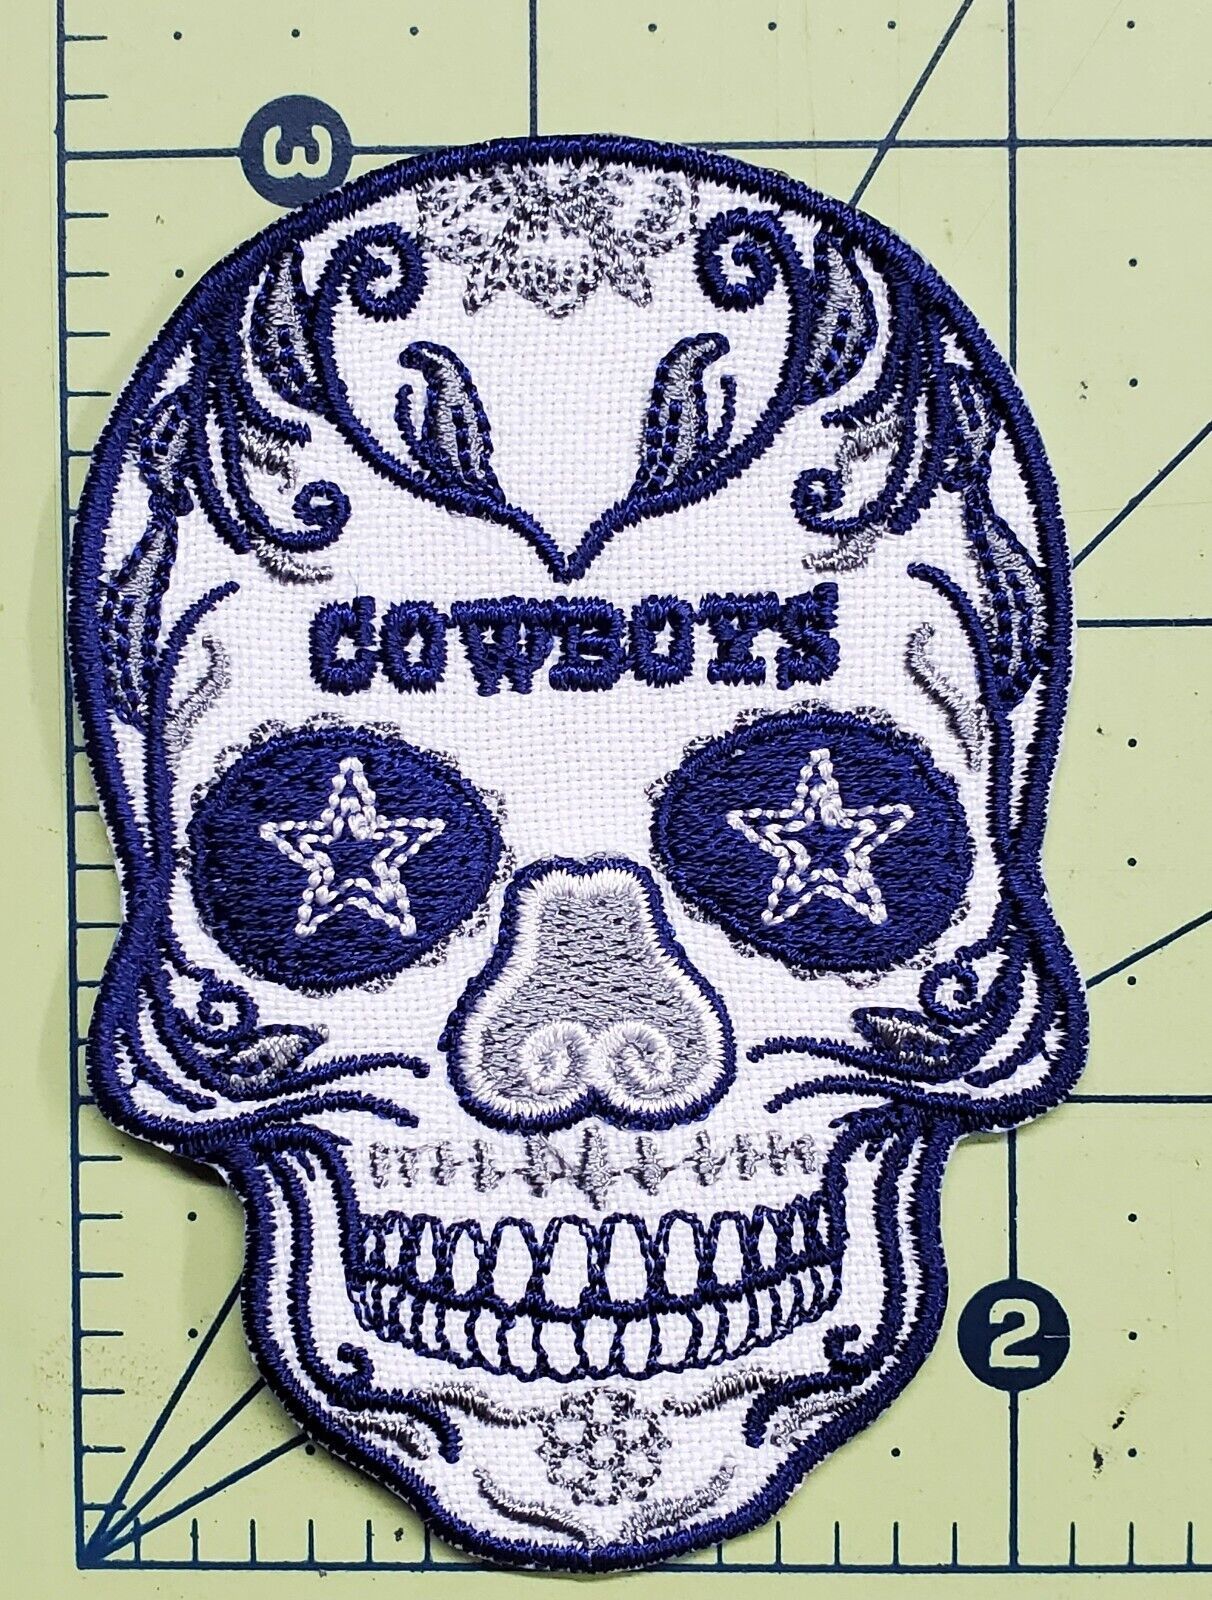 Houston Texans Sugar Skull NFL Football Embroidered Iron On Patch - $12.48 - $18.46